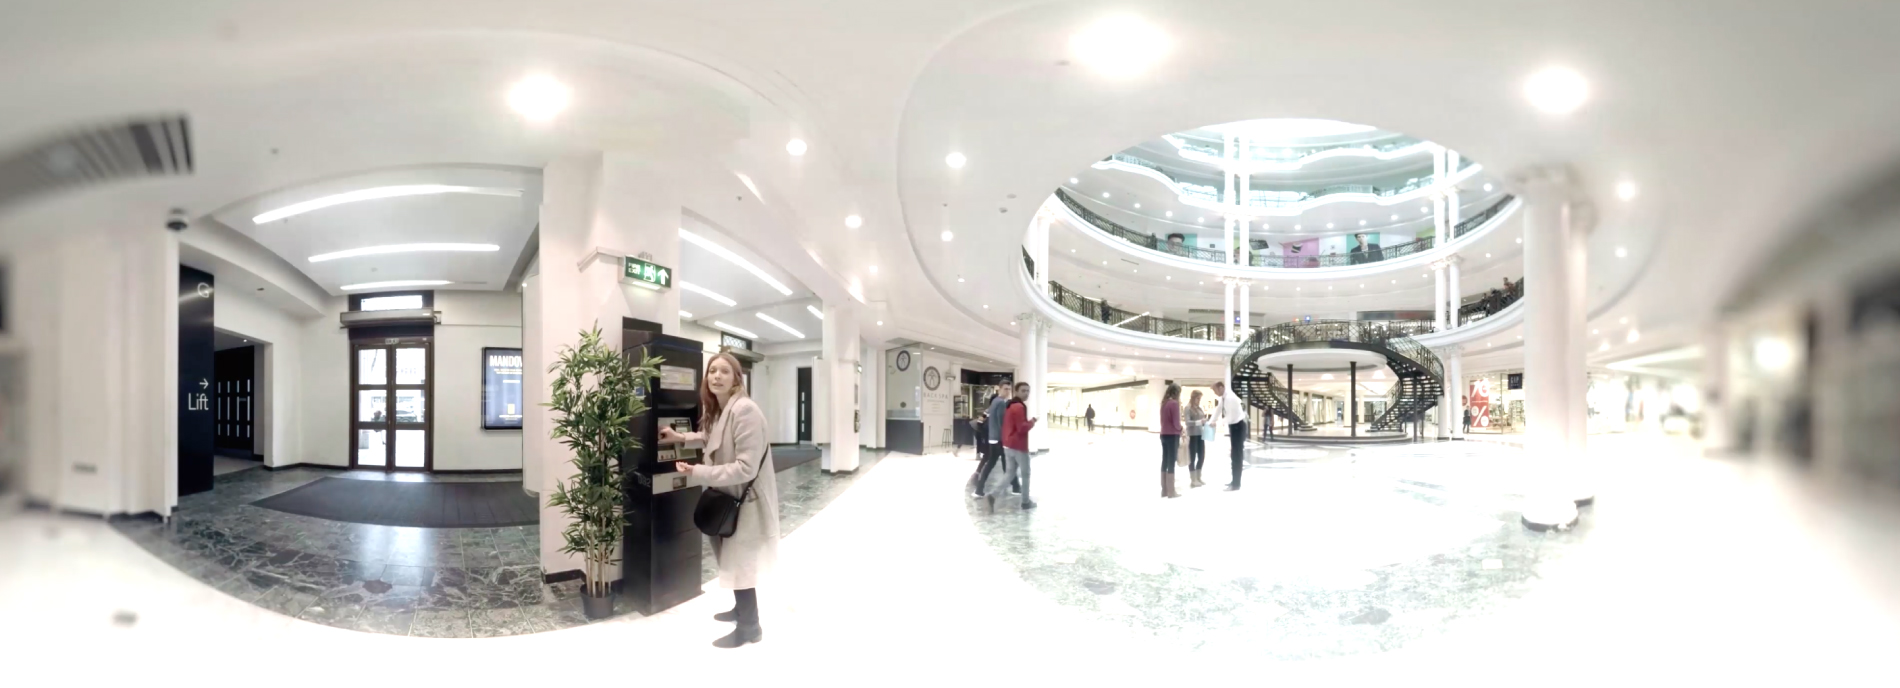 Still from a video shows a 360 degree view inside a mall.